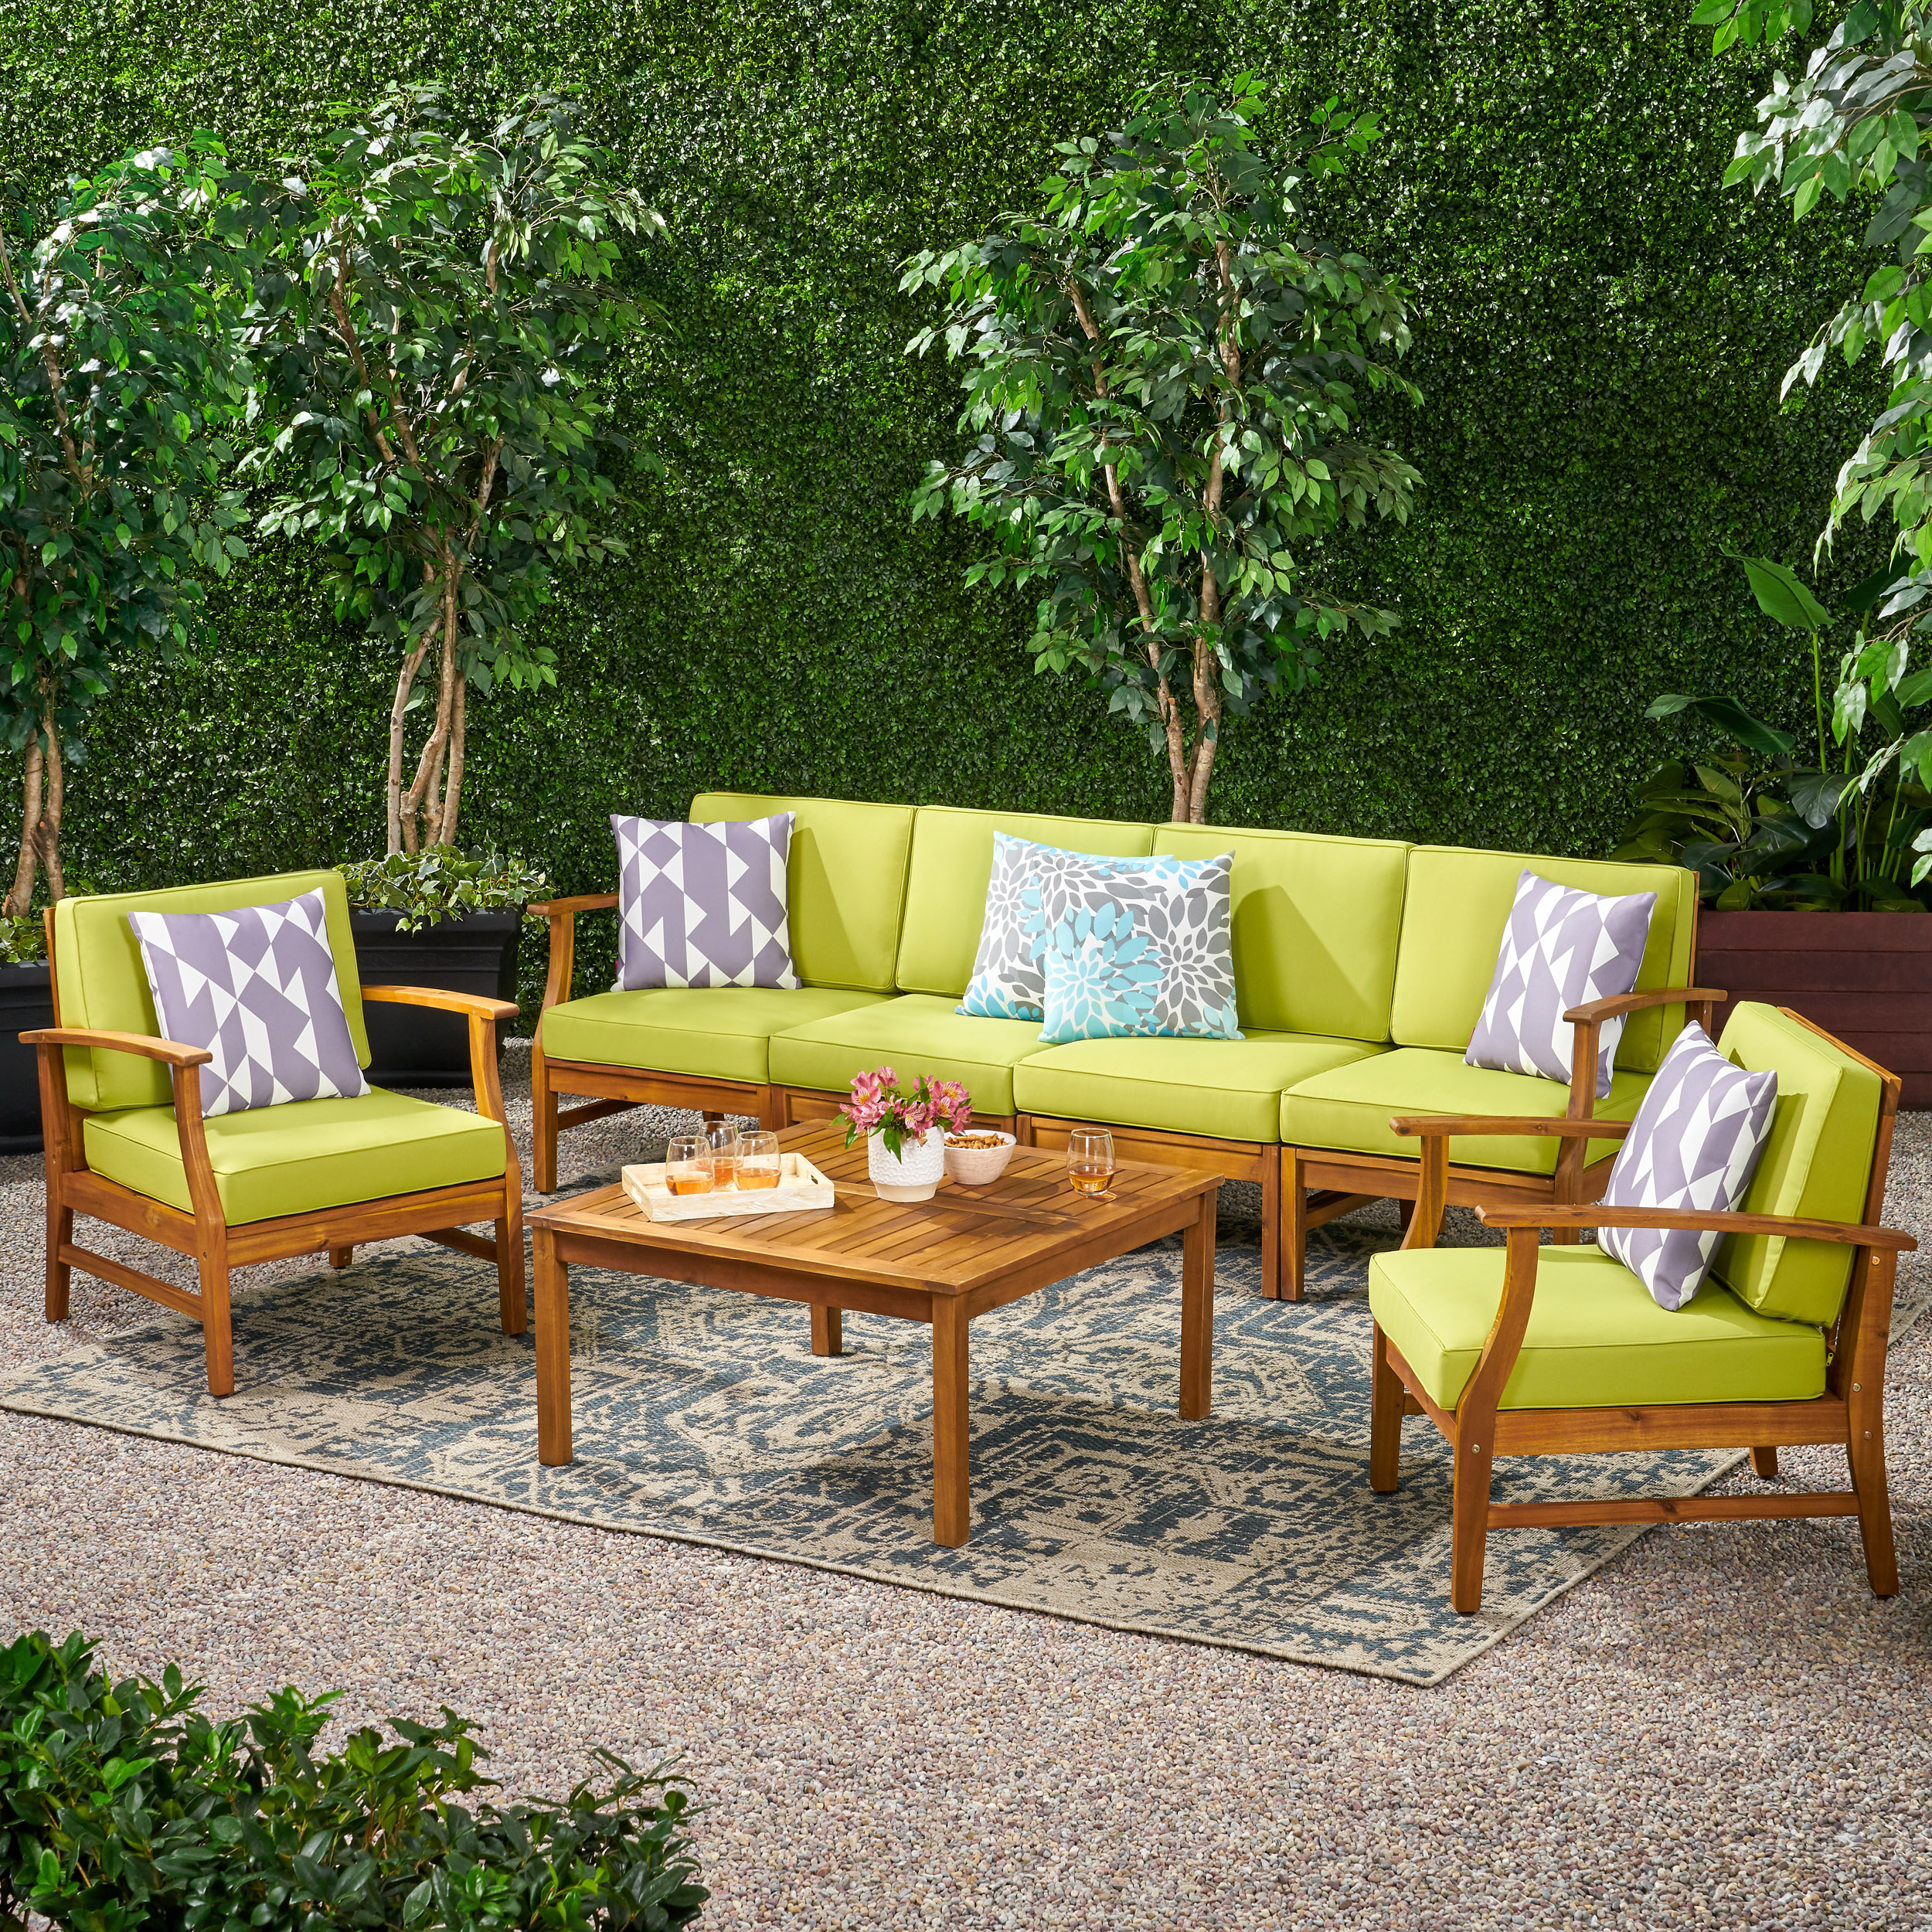 Scarlett Outdoor 6 Seat Teak Finished Acacia Wood Sofa And Table Set - Green